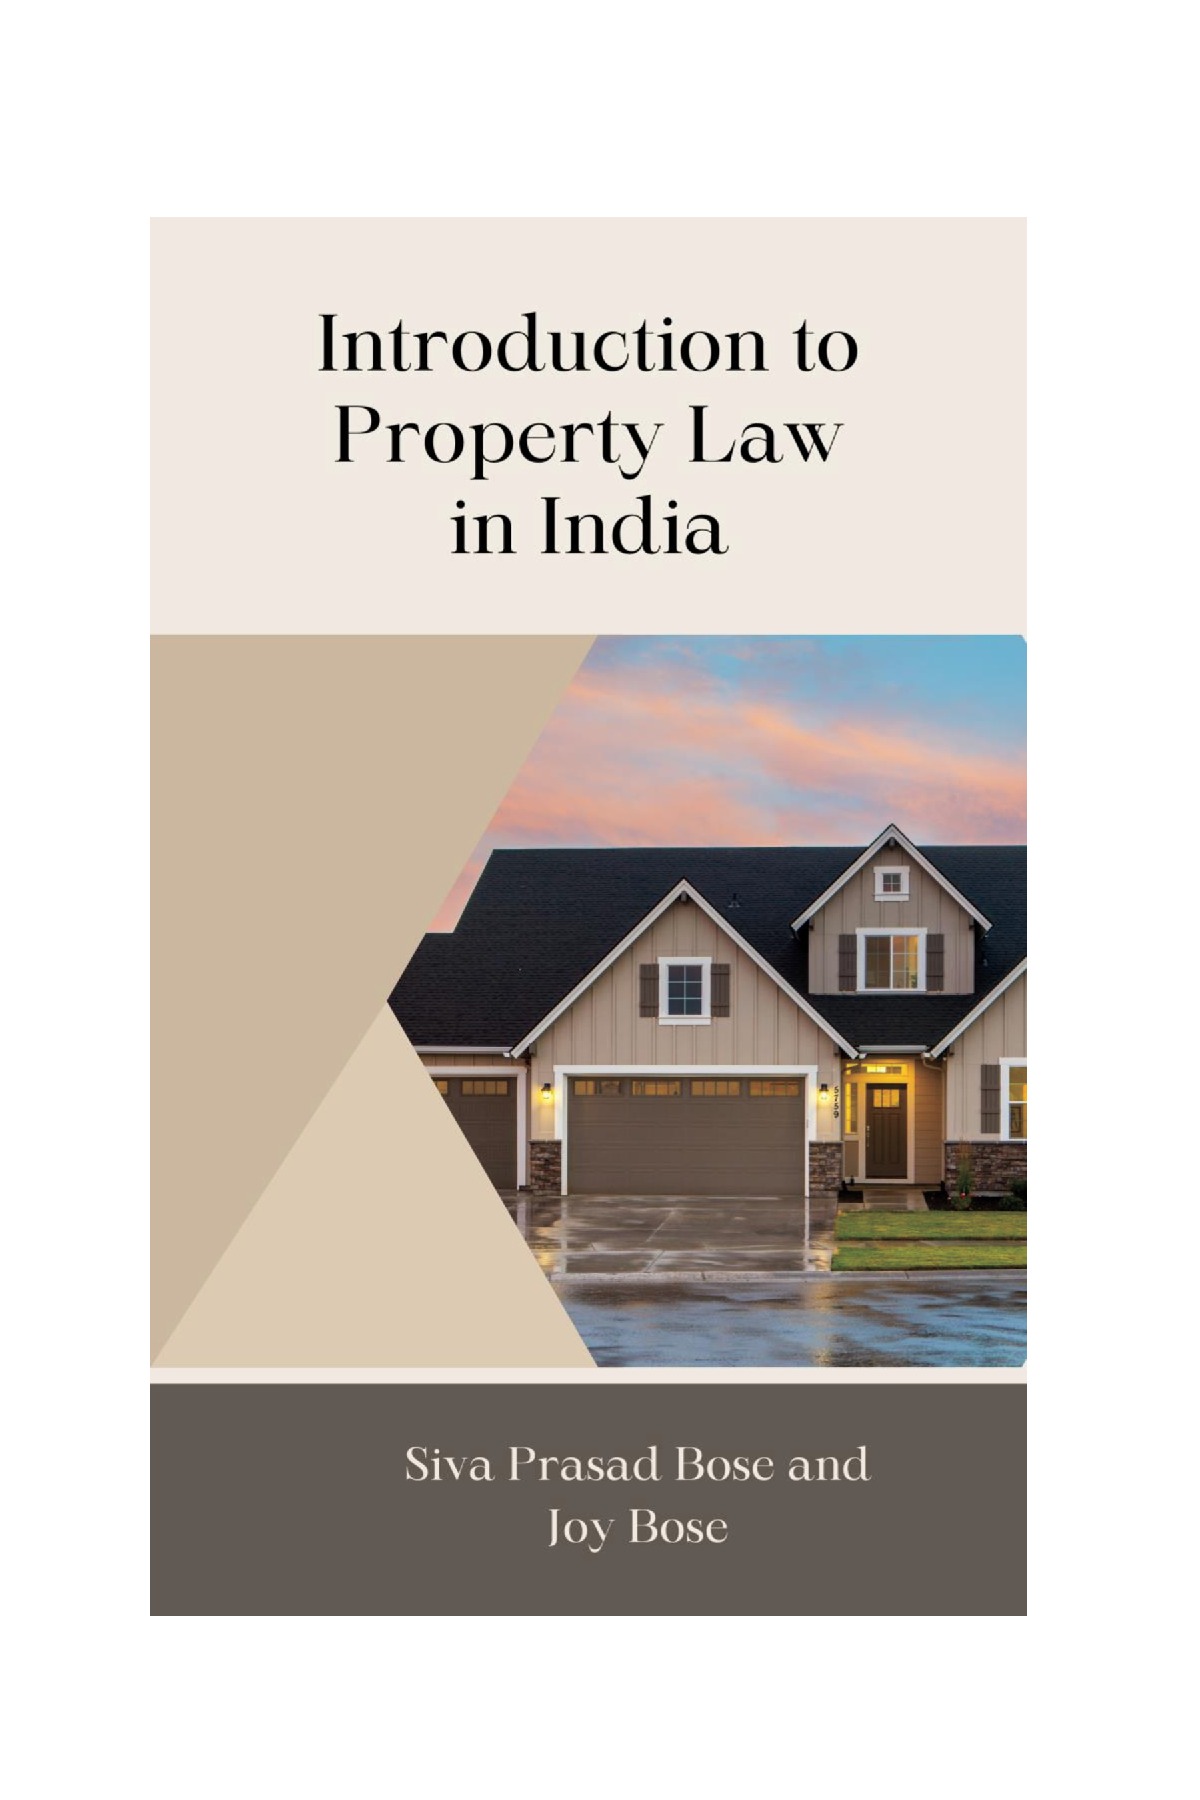 property law research topics india